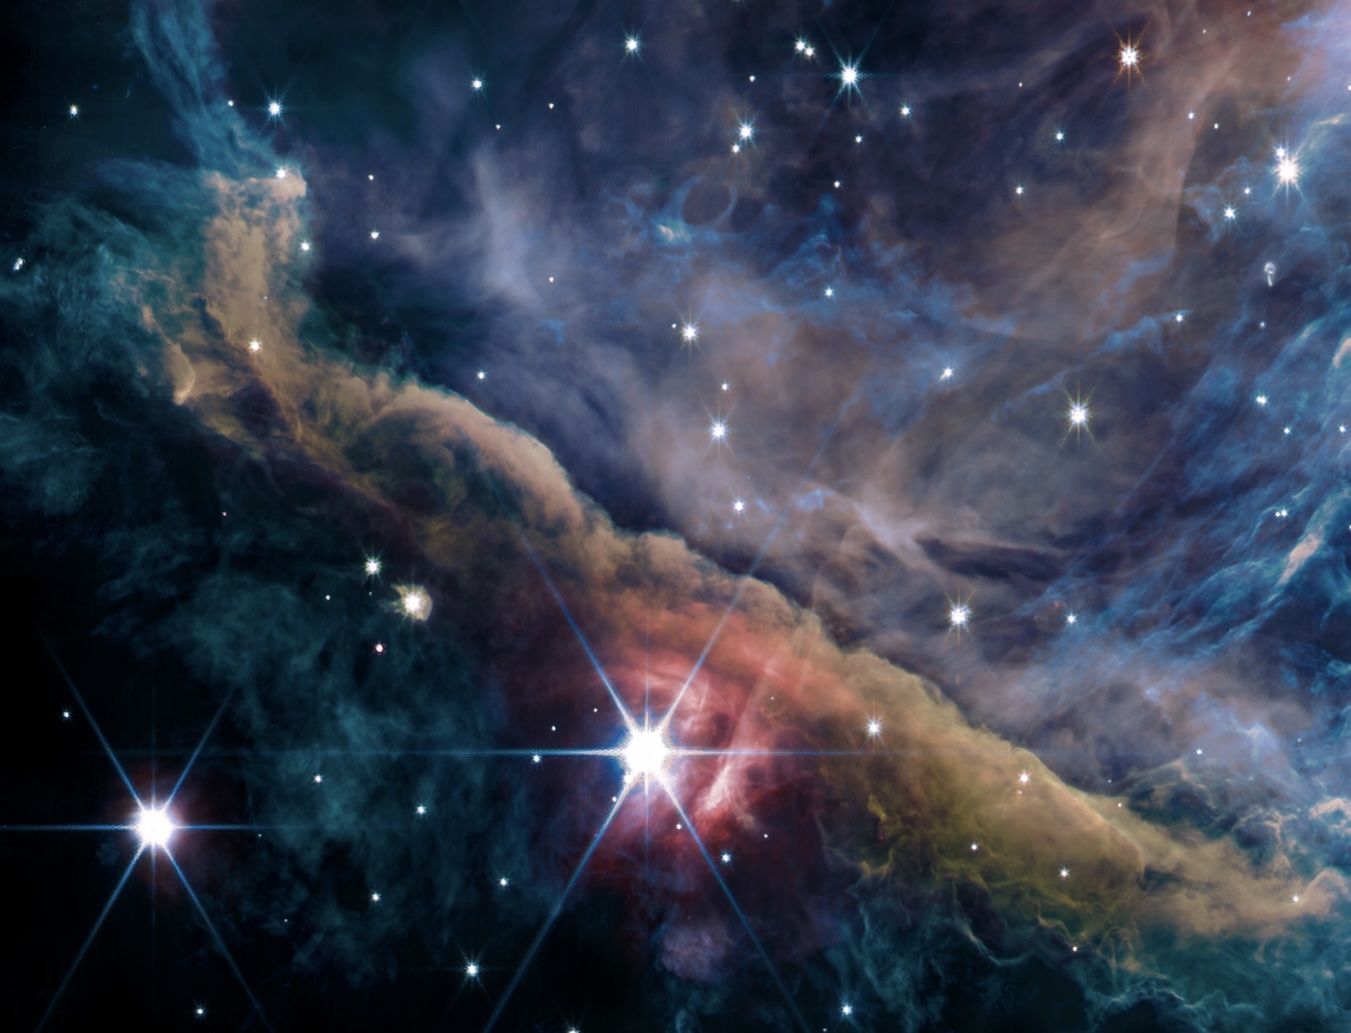 The Orion nebula as seen by the JWST, appears like a pillowy, colorful, massive cloud of gas and dust.